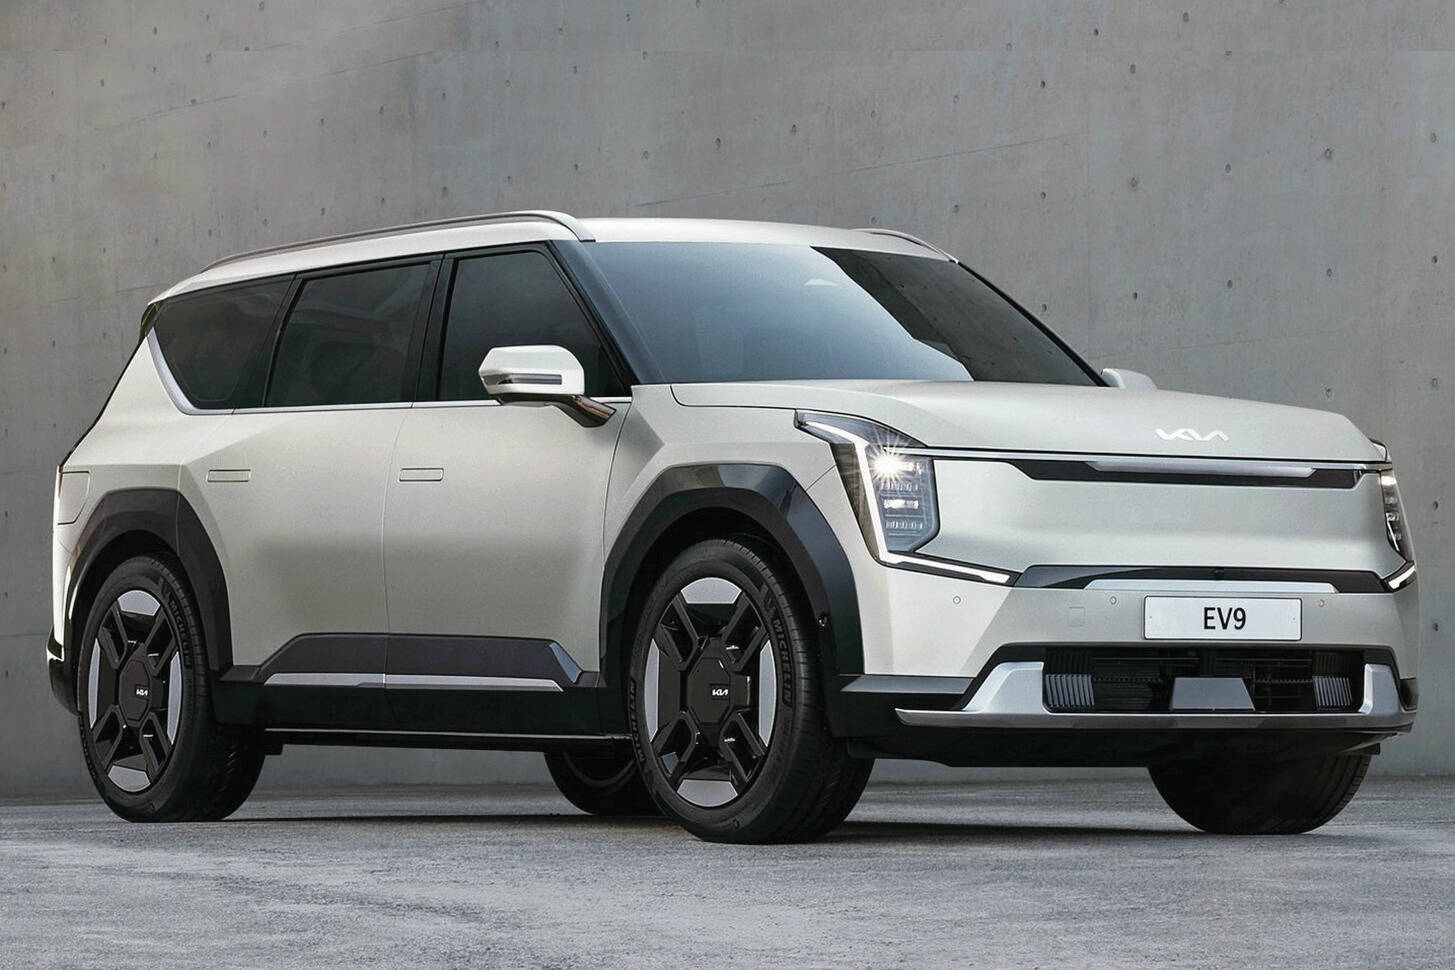 The coming EV9 electric vehicle has a blocky appearance that straddles the line between attractive and utilitarian. PHOTO: KIA